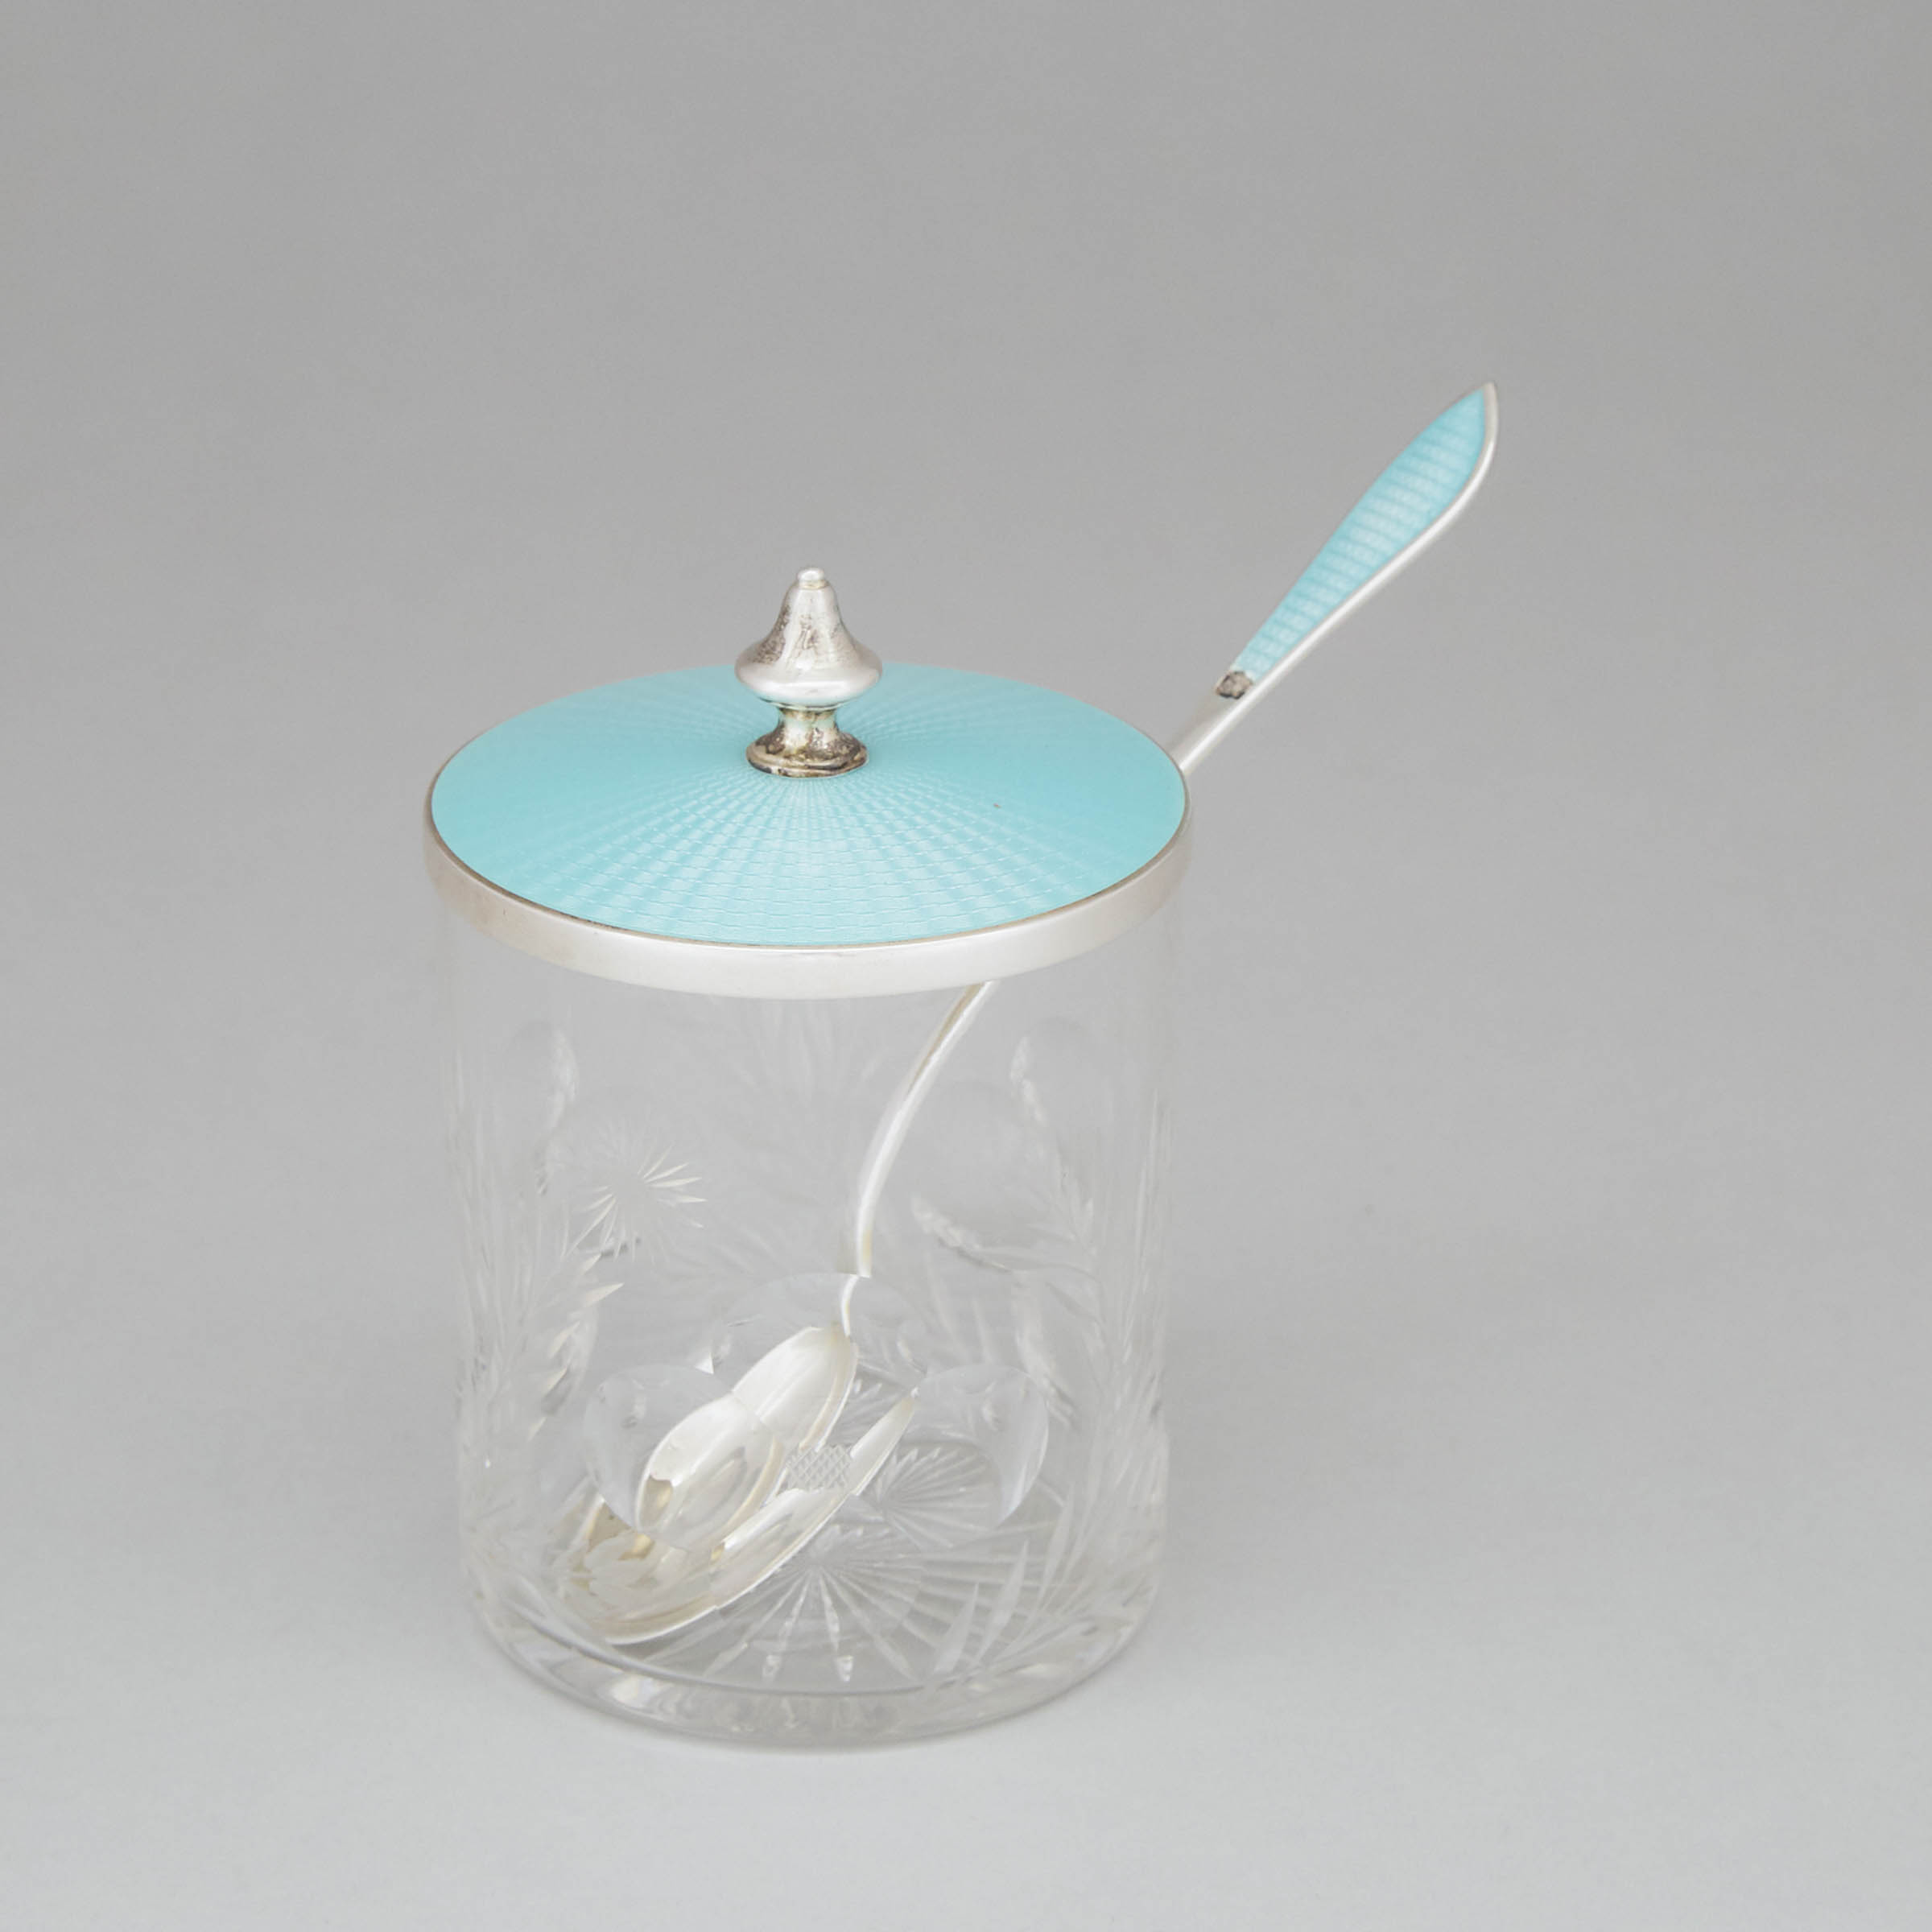 Guilloche Enameled Silver Covered Cut Glass Preserve Jar with Spoon, probably Russian, 20th century